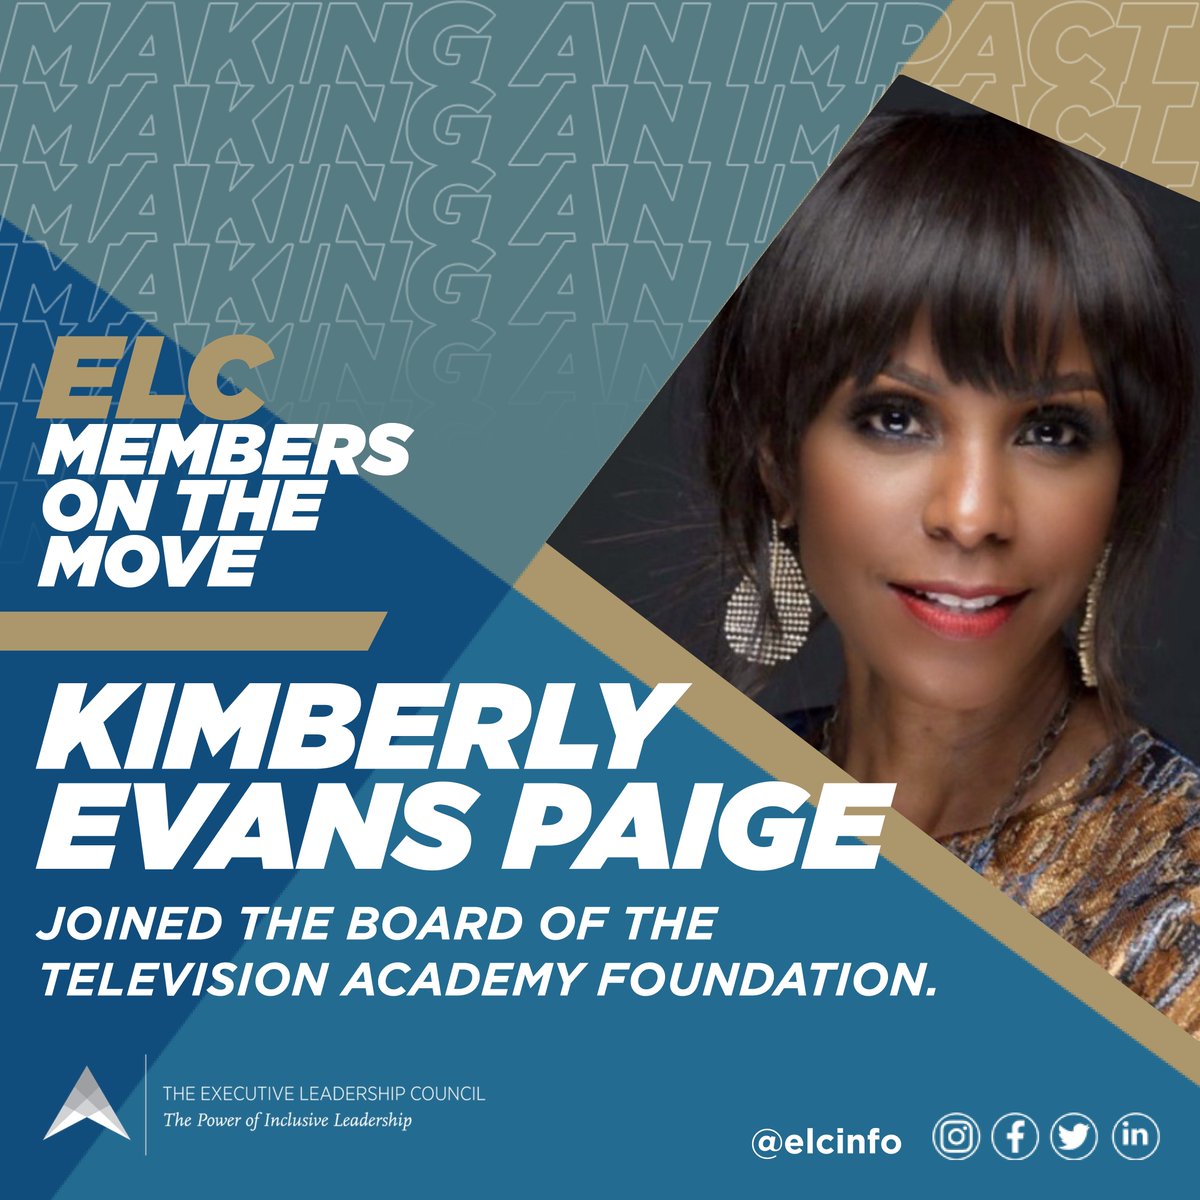 Congratulations to #ELCMember Kimberly Evans Paige, who joined the Board of the Television Academy Foundation (@TelevisionAcad).

#ELCMembersOnTheMove #BlackWomenLead #BlackExecutives #BlackLeadership